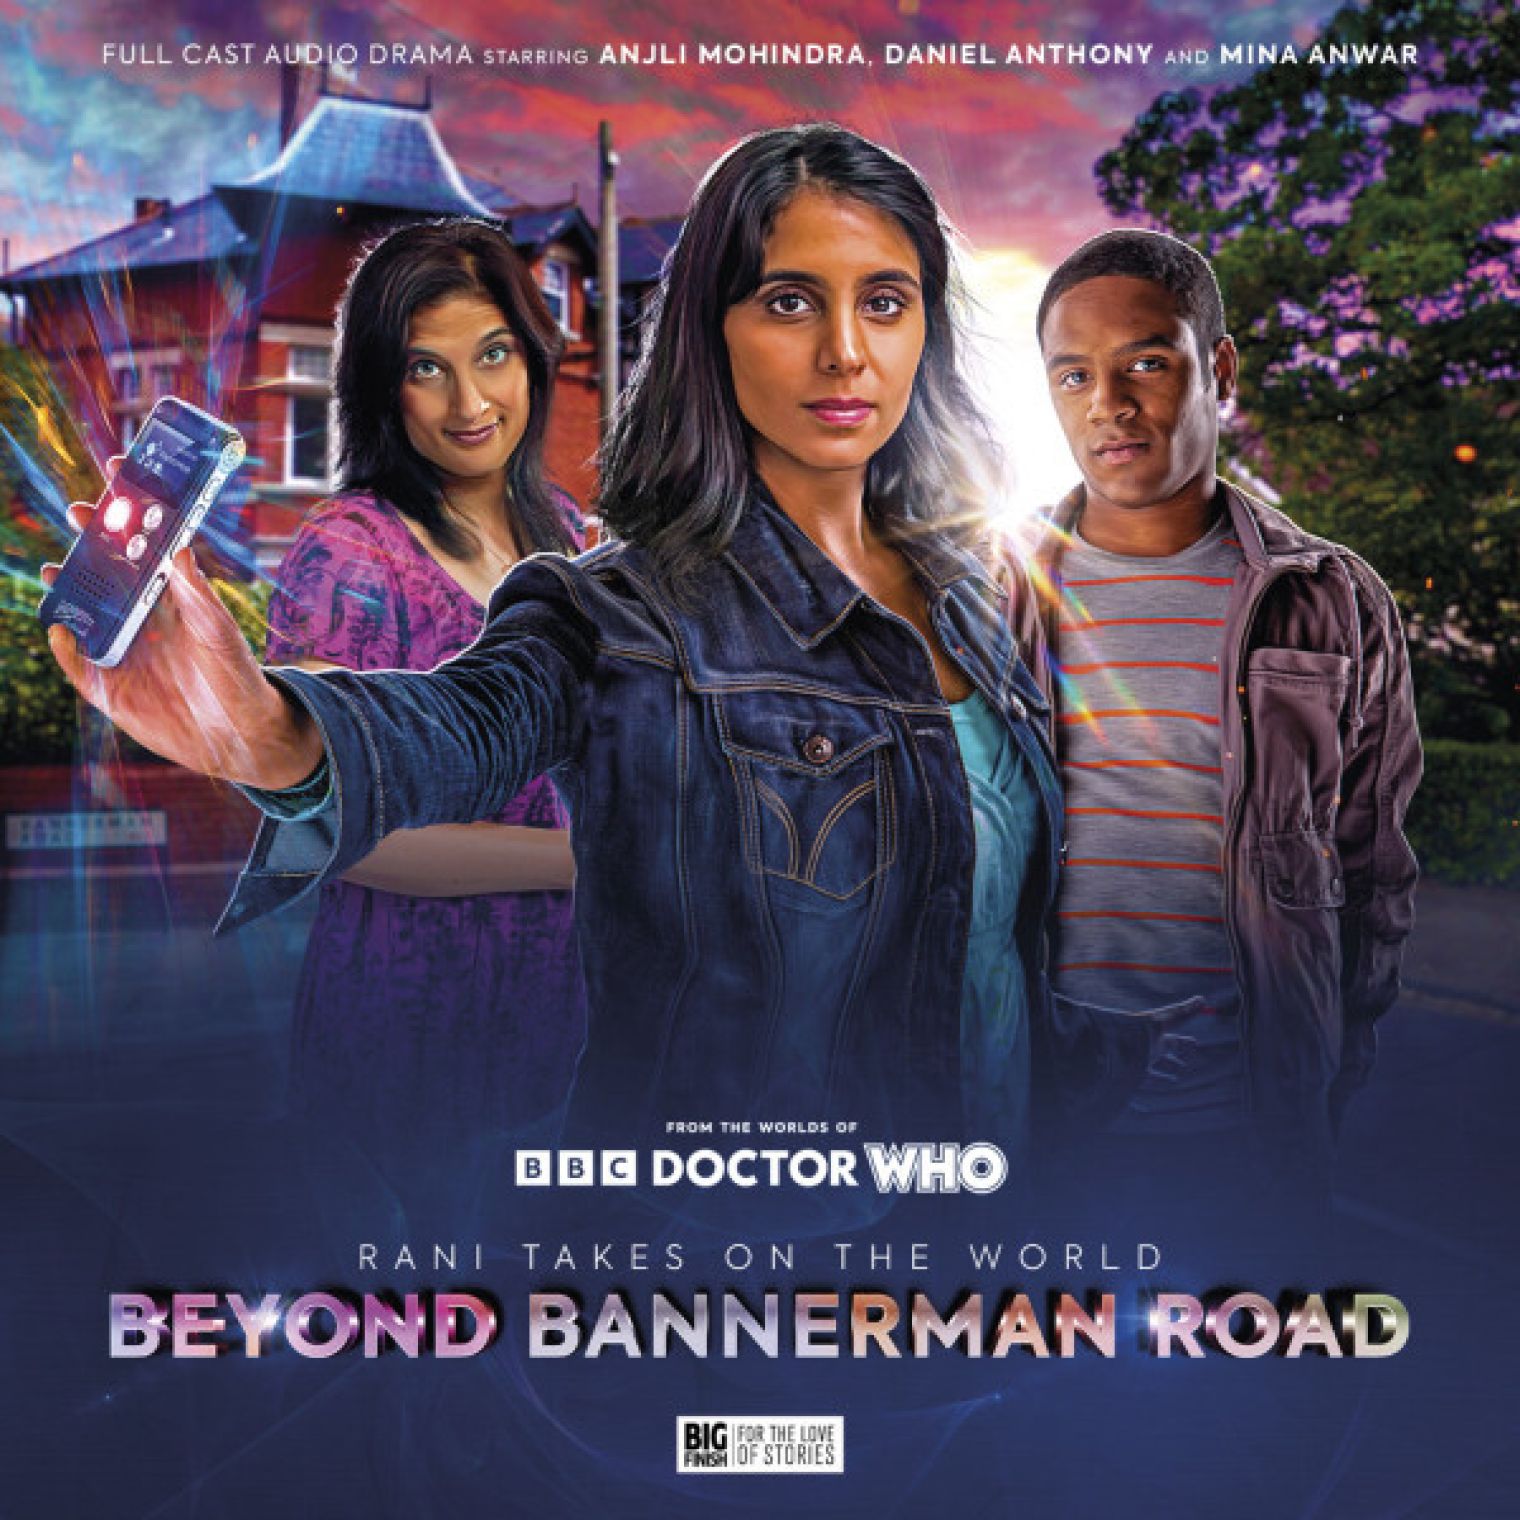 Anjli Mohindra stars in 'Rani Takes on the World: Beyond Bannerman Road', a special audio drama release from the Worlds of Doctor Who